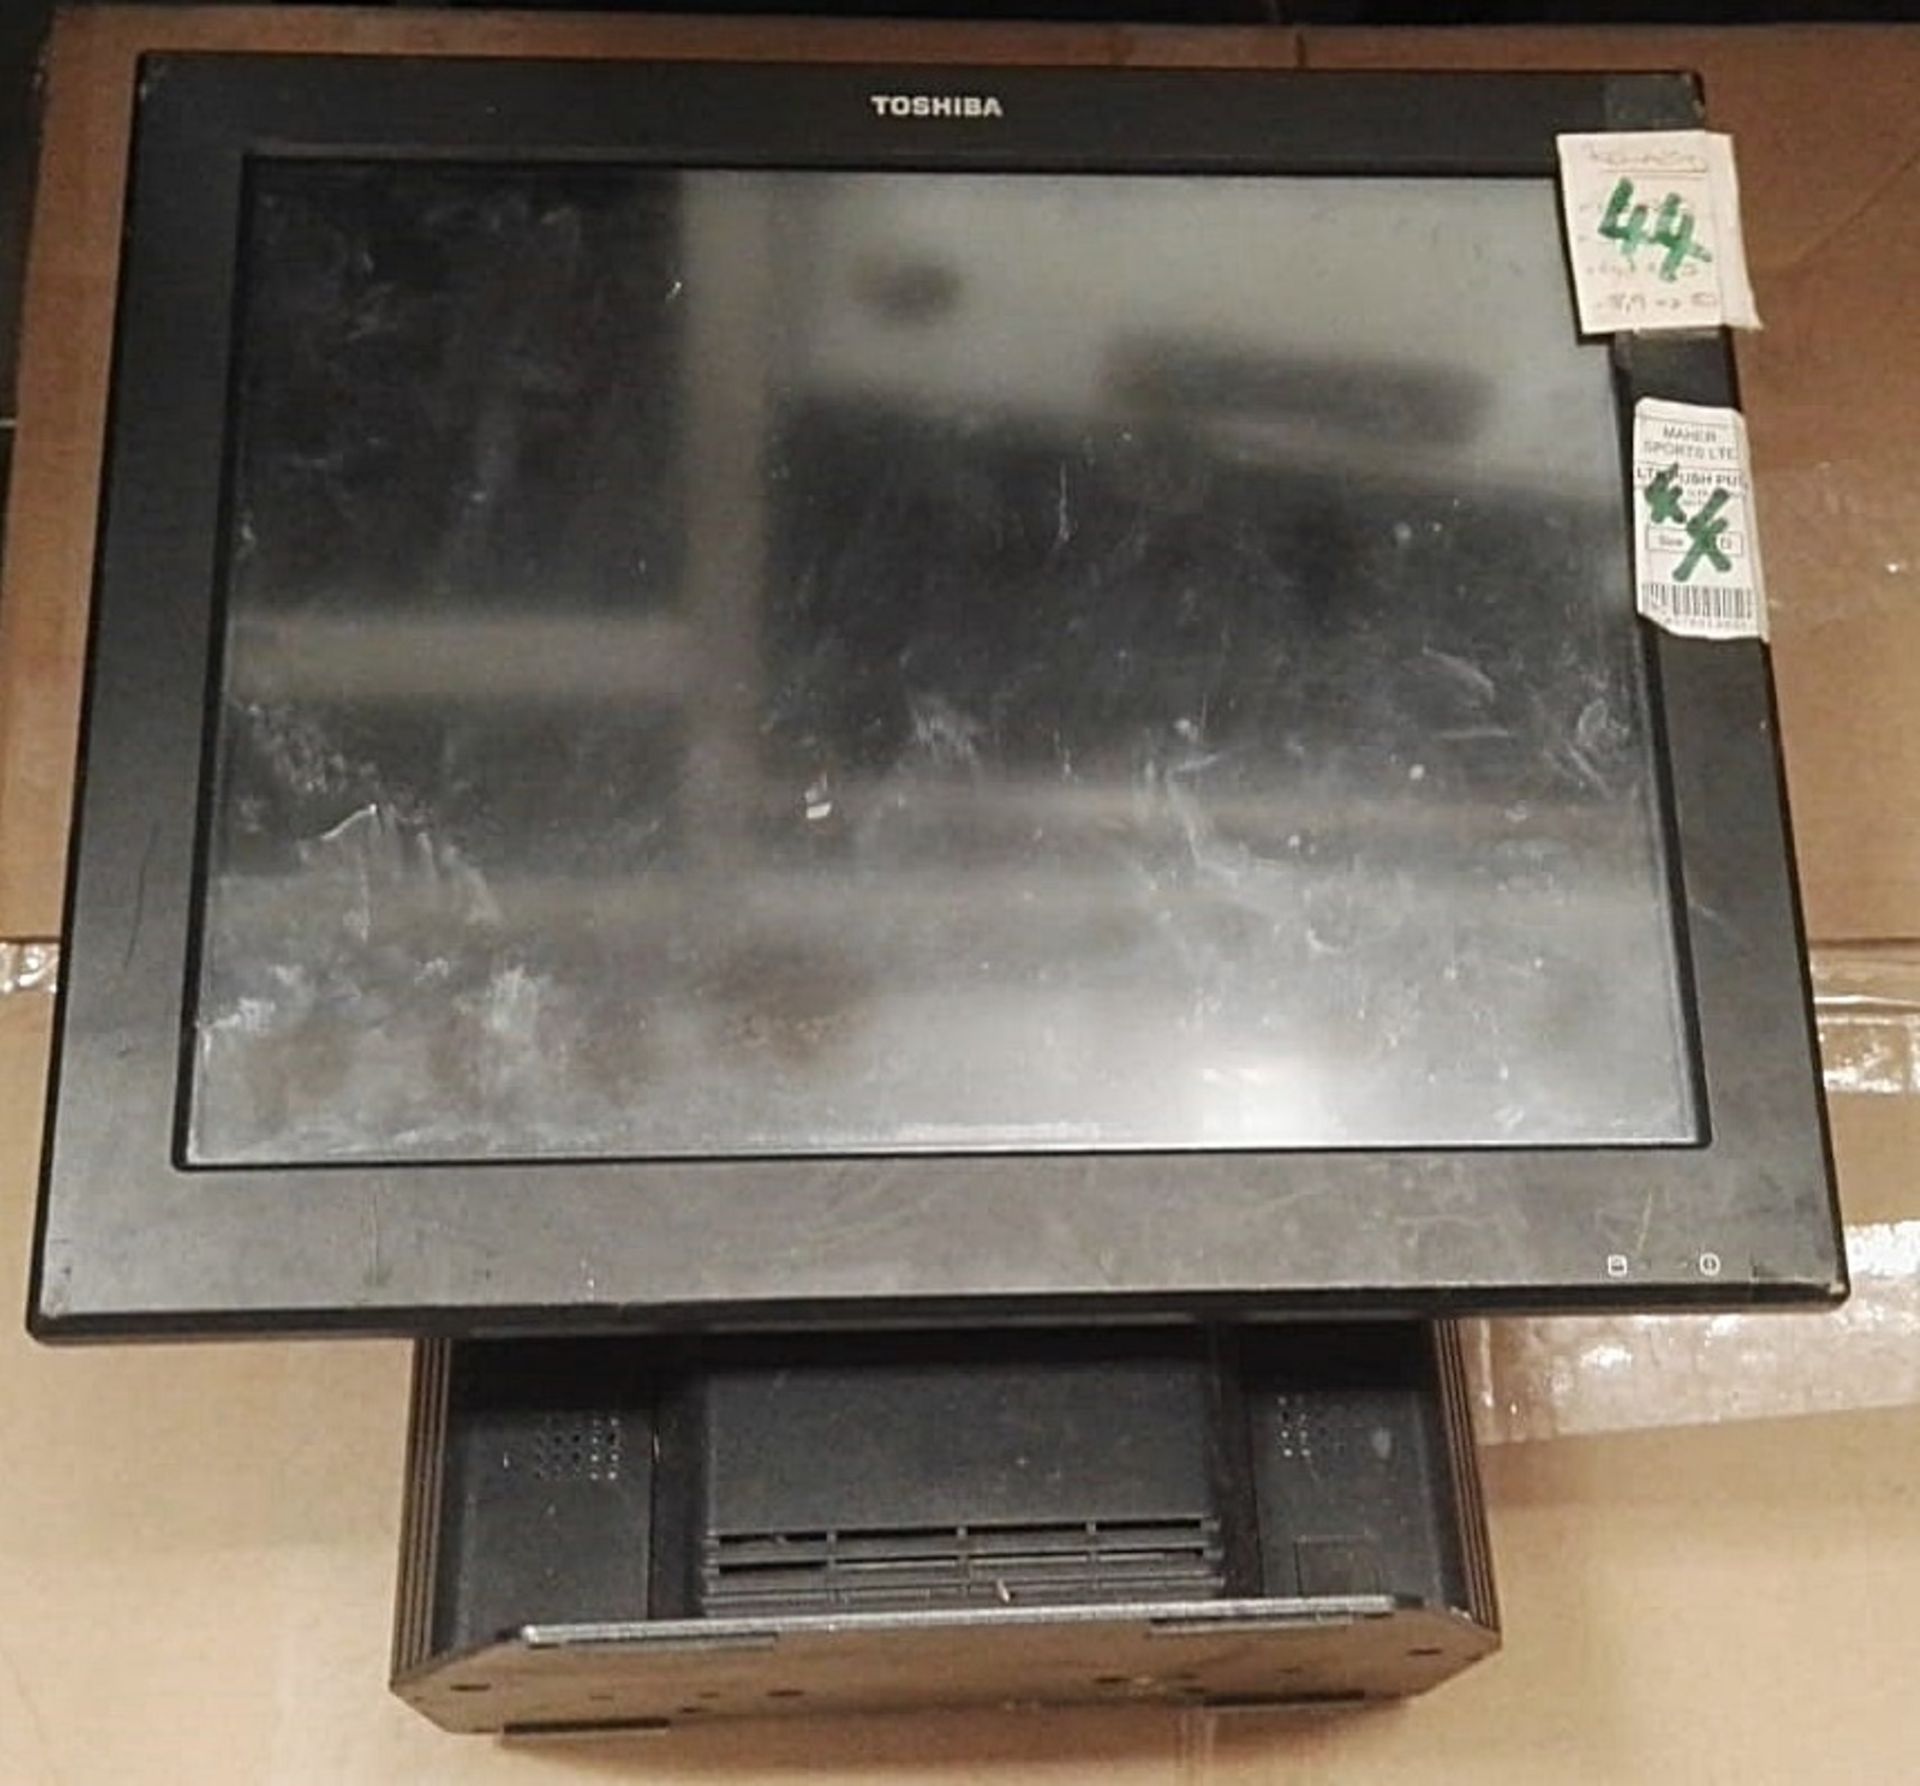 1 x Toshiba Till System - Used, Recently Removed From A Working Site - CL505 - Ref: TL044 - - Image 2 of 5